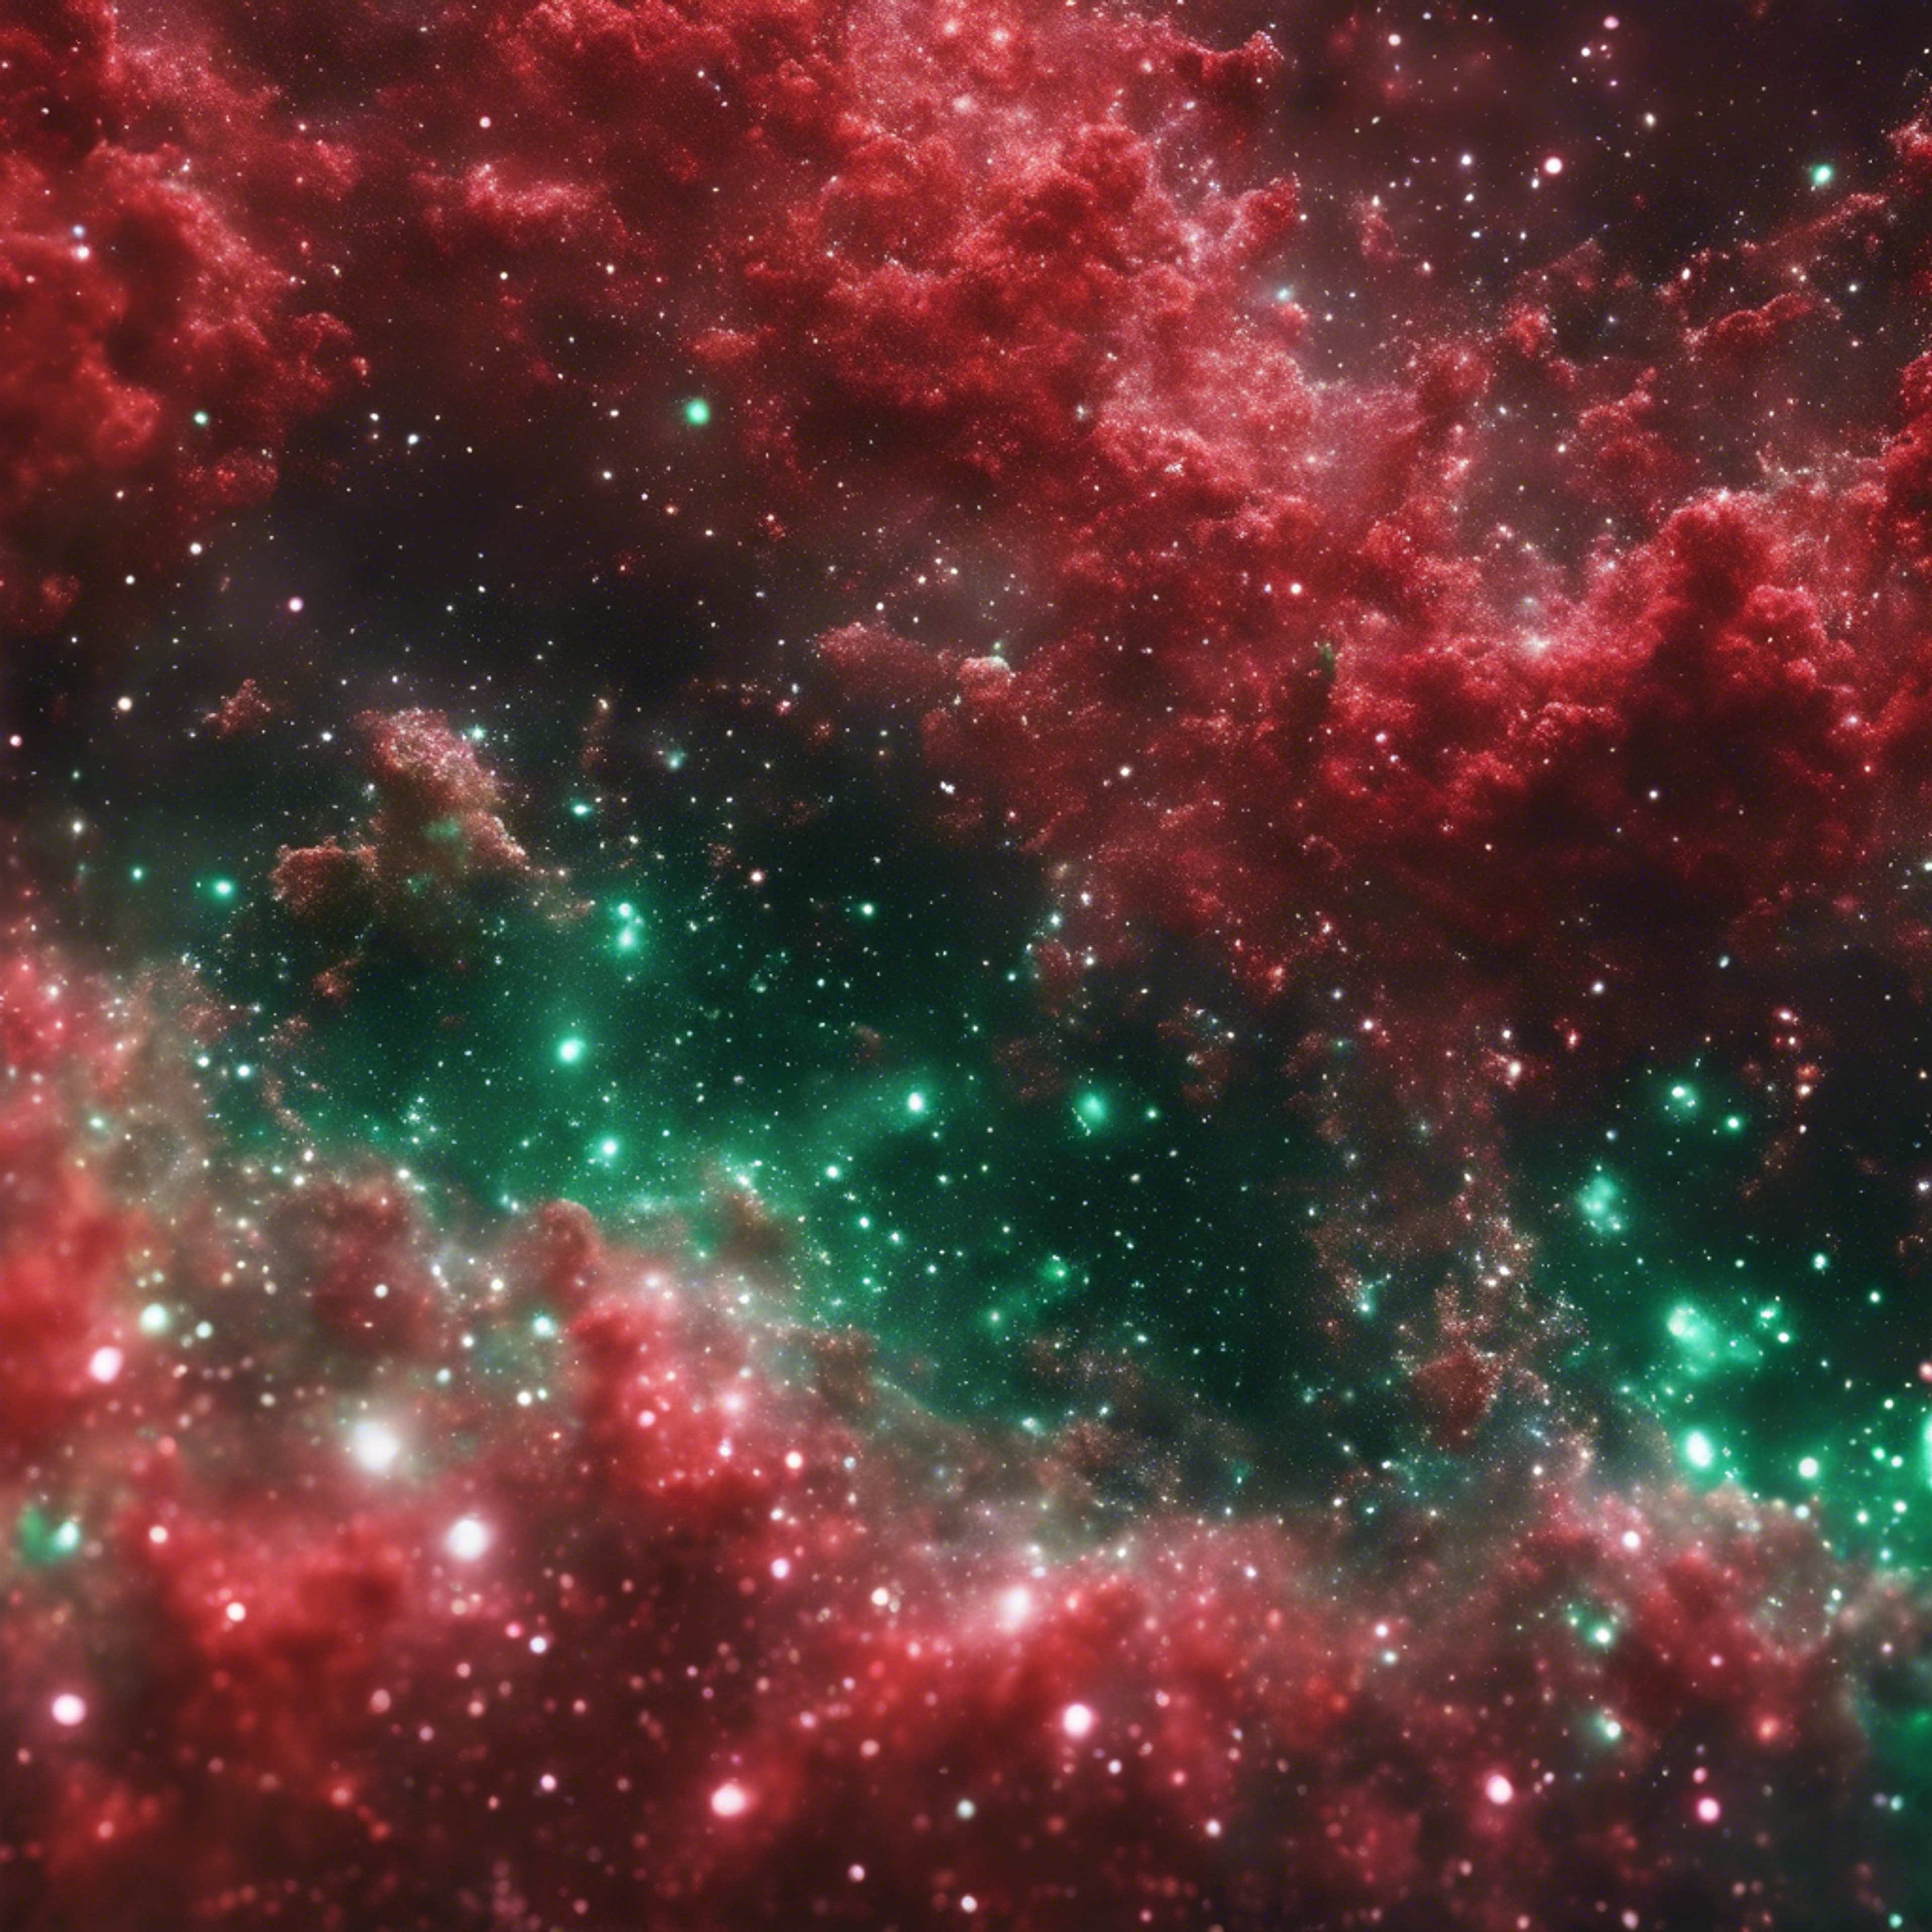 Red and green glitter spread like a nebula in space Kertas dinding[56bea9c0023d4b1f9afc]